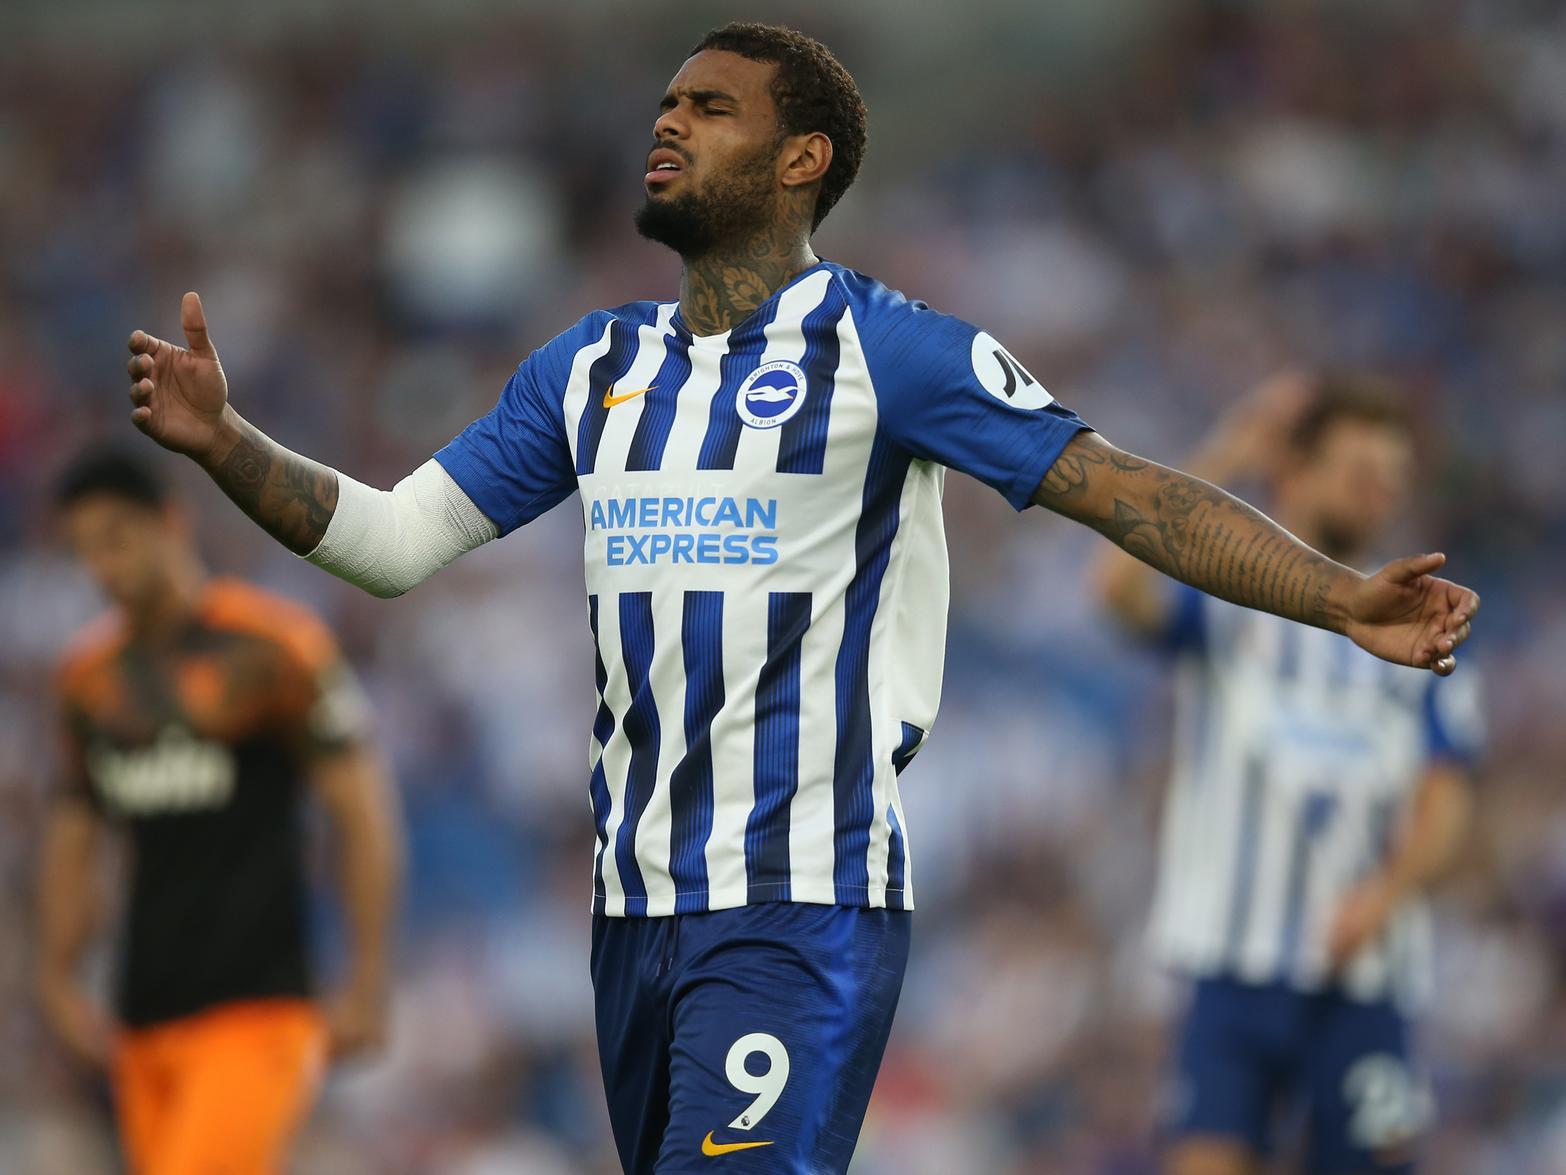 Locadia joined the Seagulls for a hefty 14m, but he failed to cut the mustard over the past season and a half. He's now with Hoffenheim in the Bundesliga, where he's scored four in five starts.